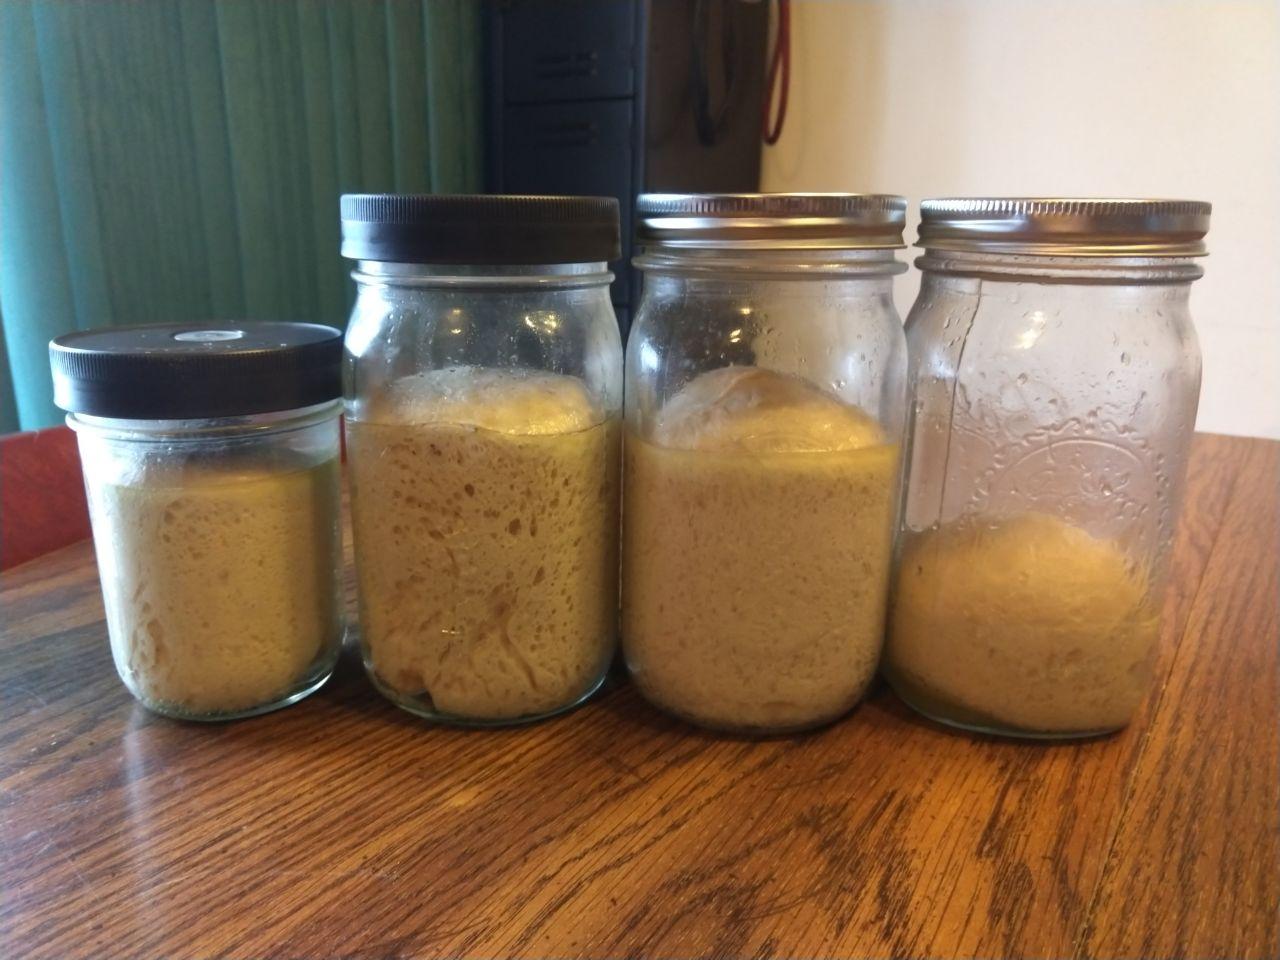 Jars of dough after fermenting for a day.